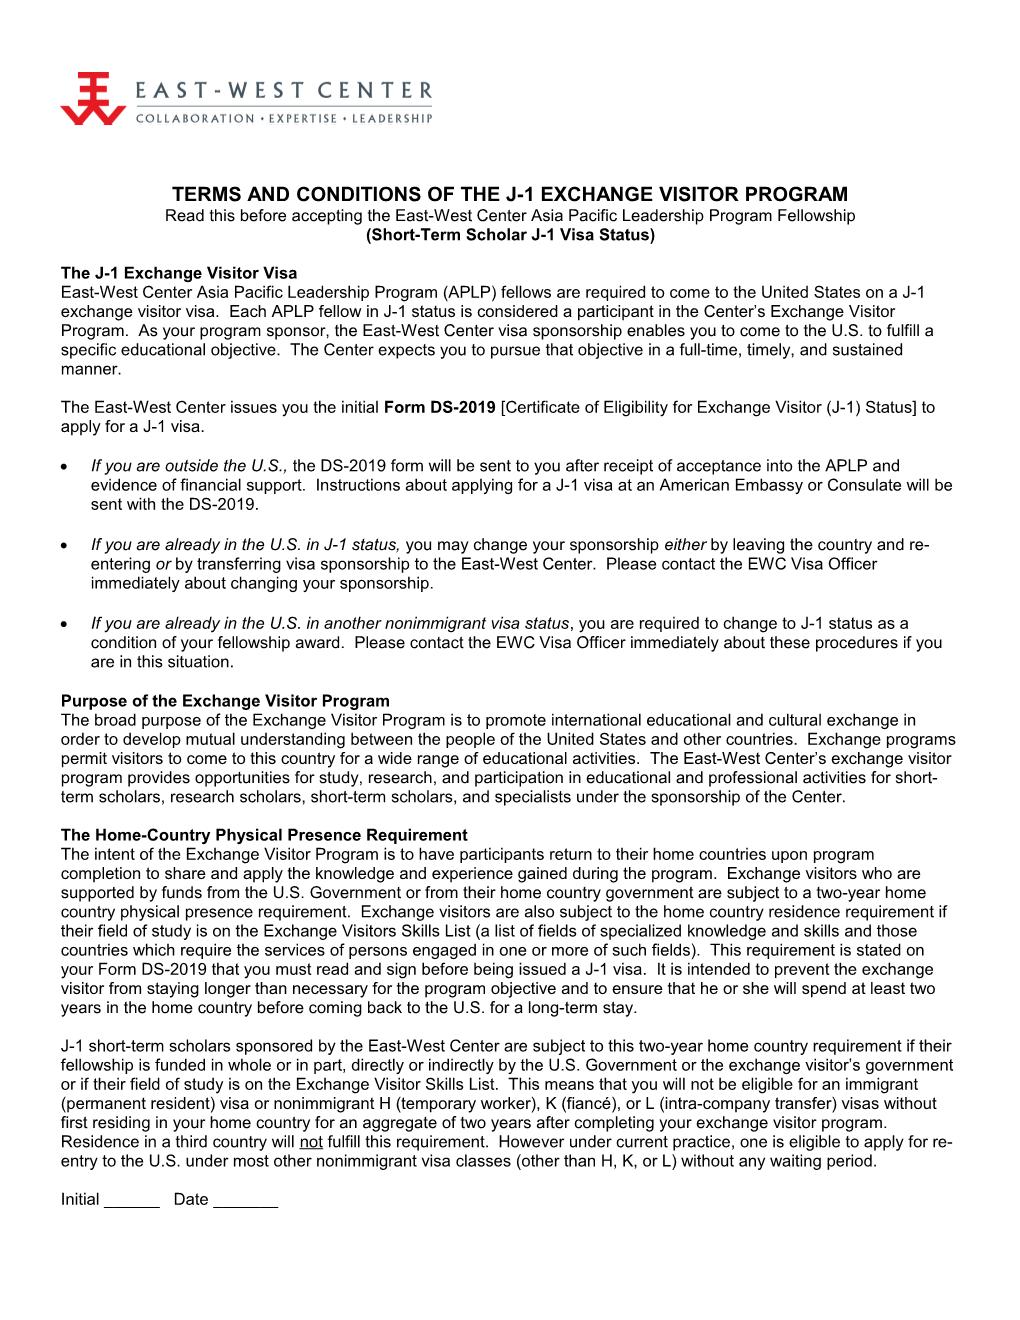 Terms and Conditions of the J-1 Exchange Visitor Program